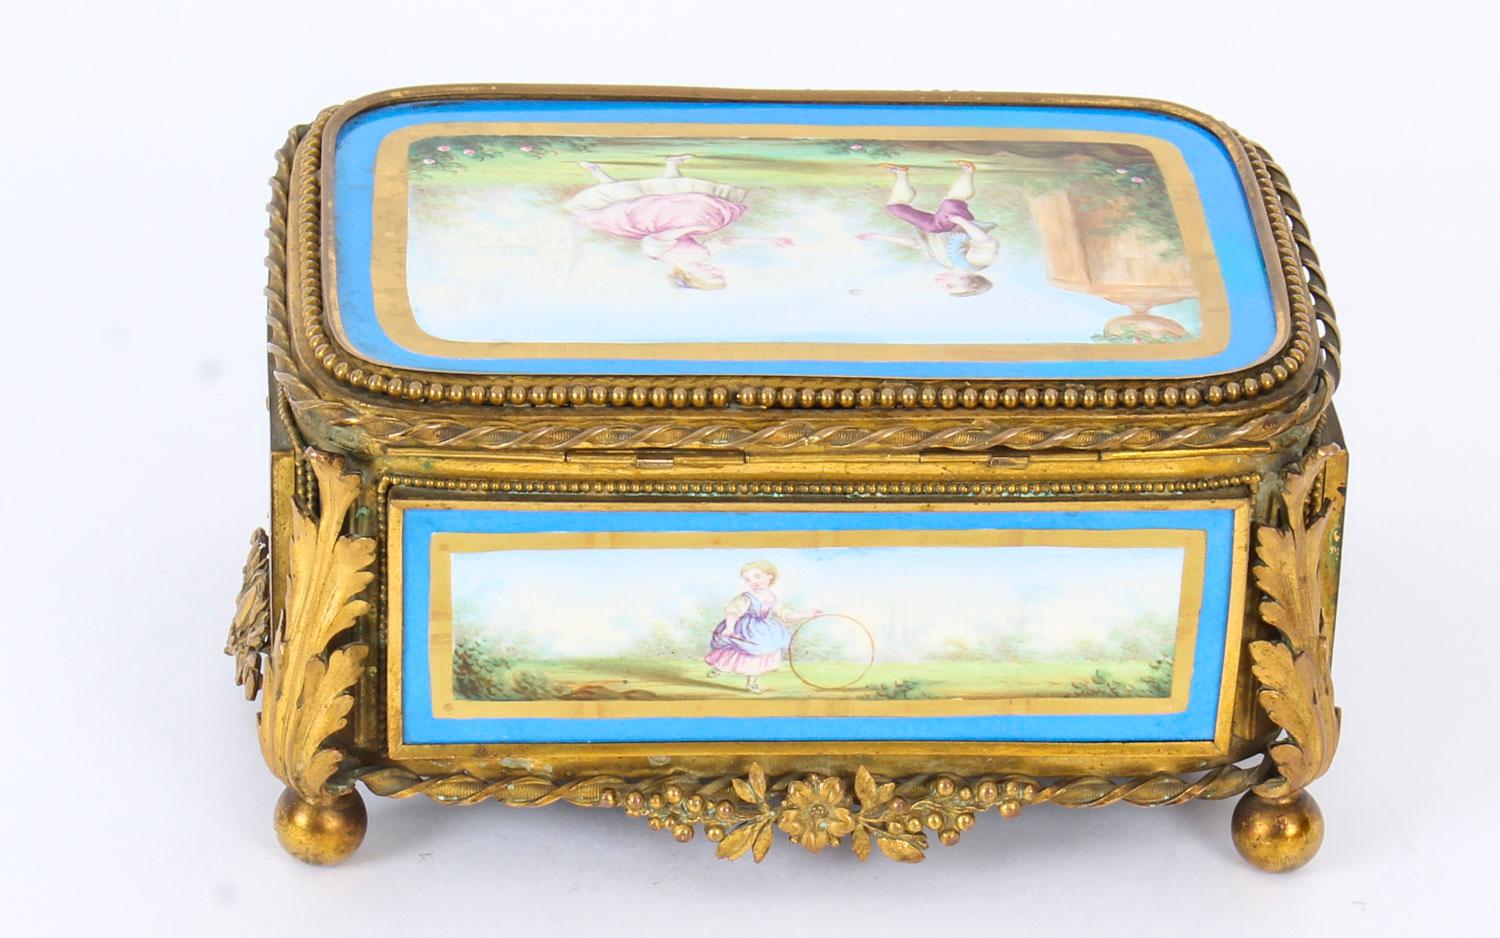 Antique French Sevres Porcelain and Ormolu Jewellery Casket, 19th Century 2